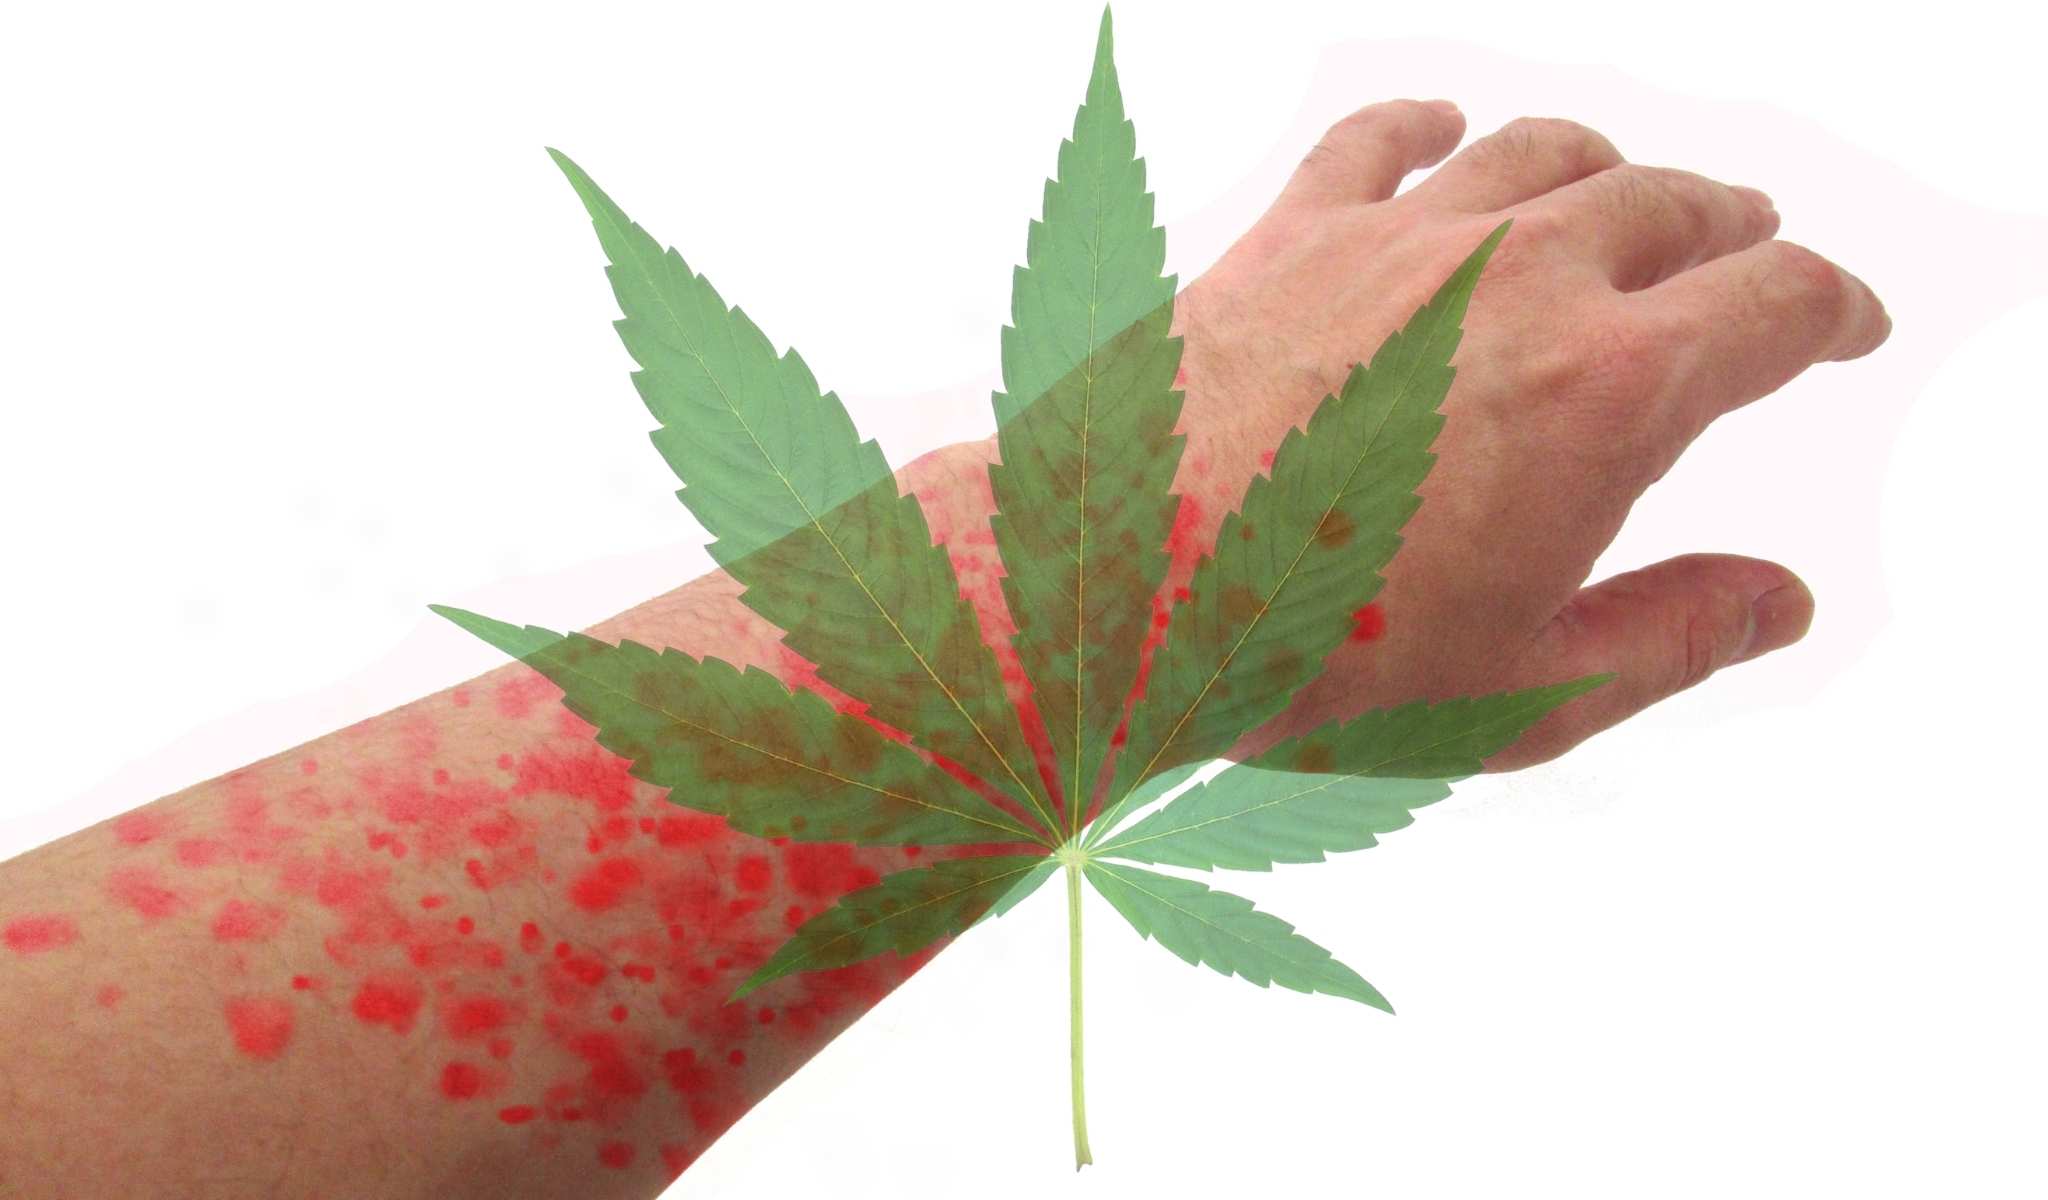 Will CBD Oil Help With Hives? The Role of Cannabidiol in Reducing Inflammation